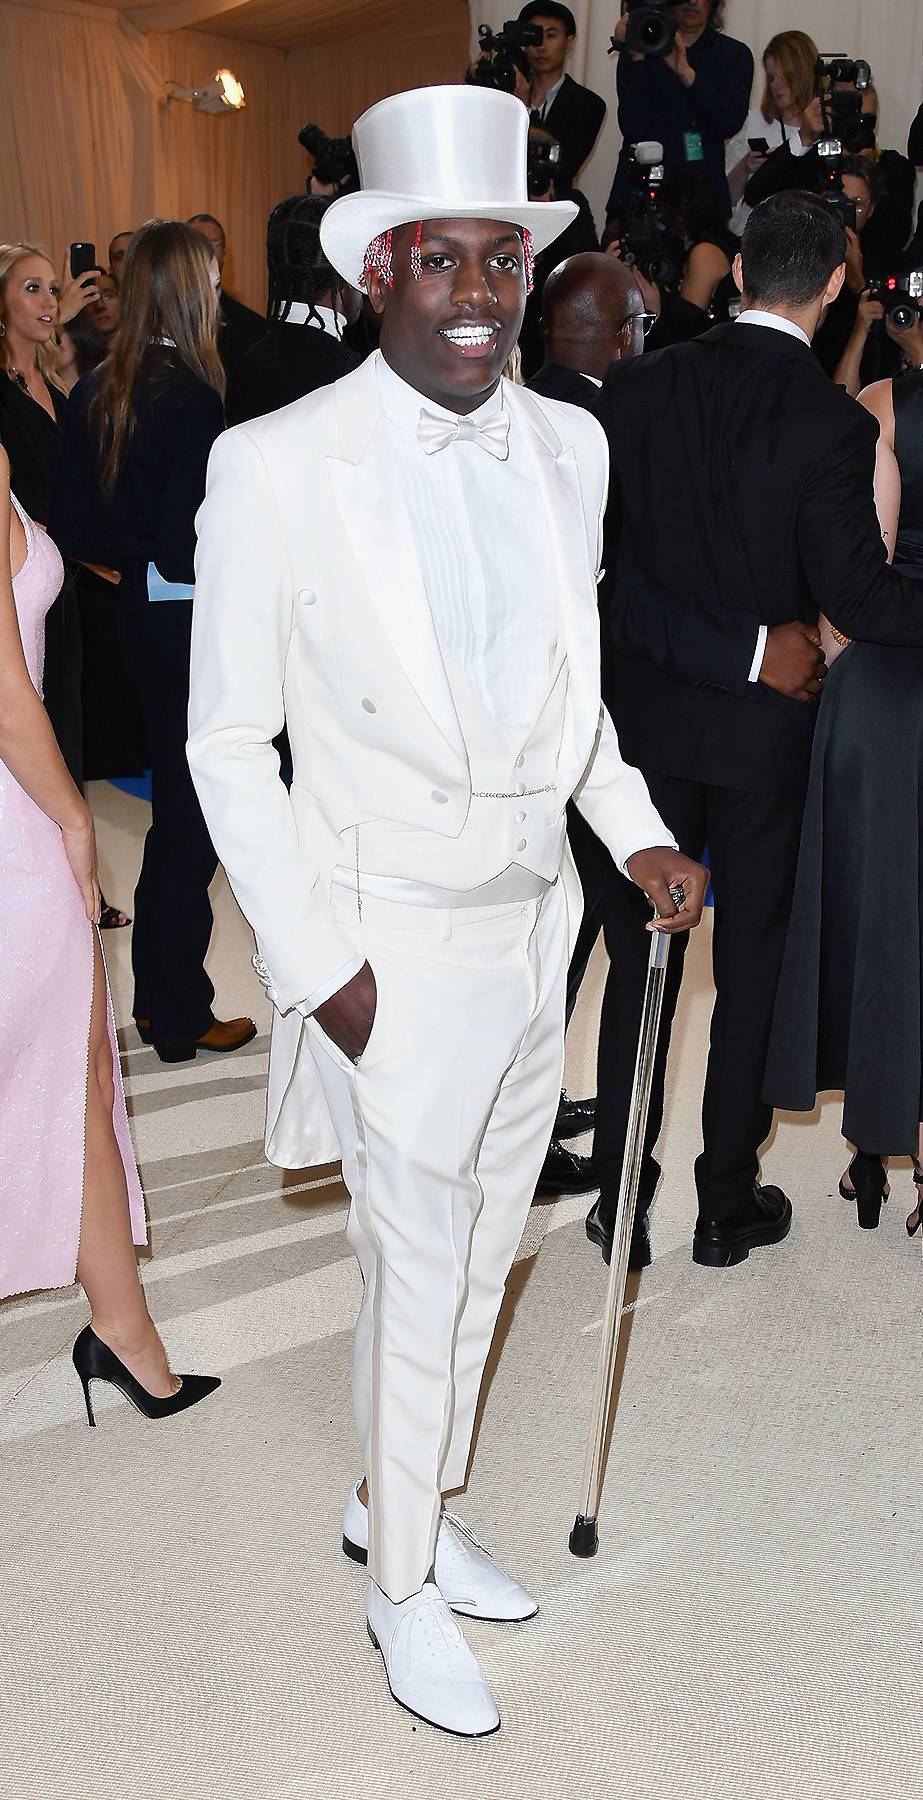 Lil Yachty - Lil - Image 11 from See All The Looks From the MET Gala ...